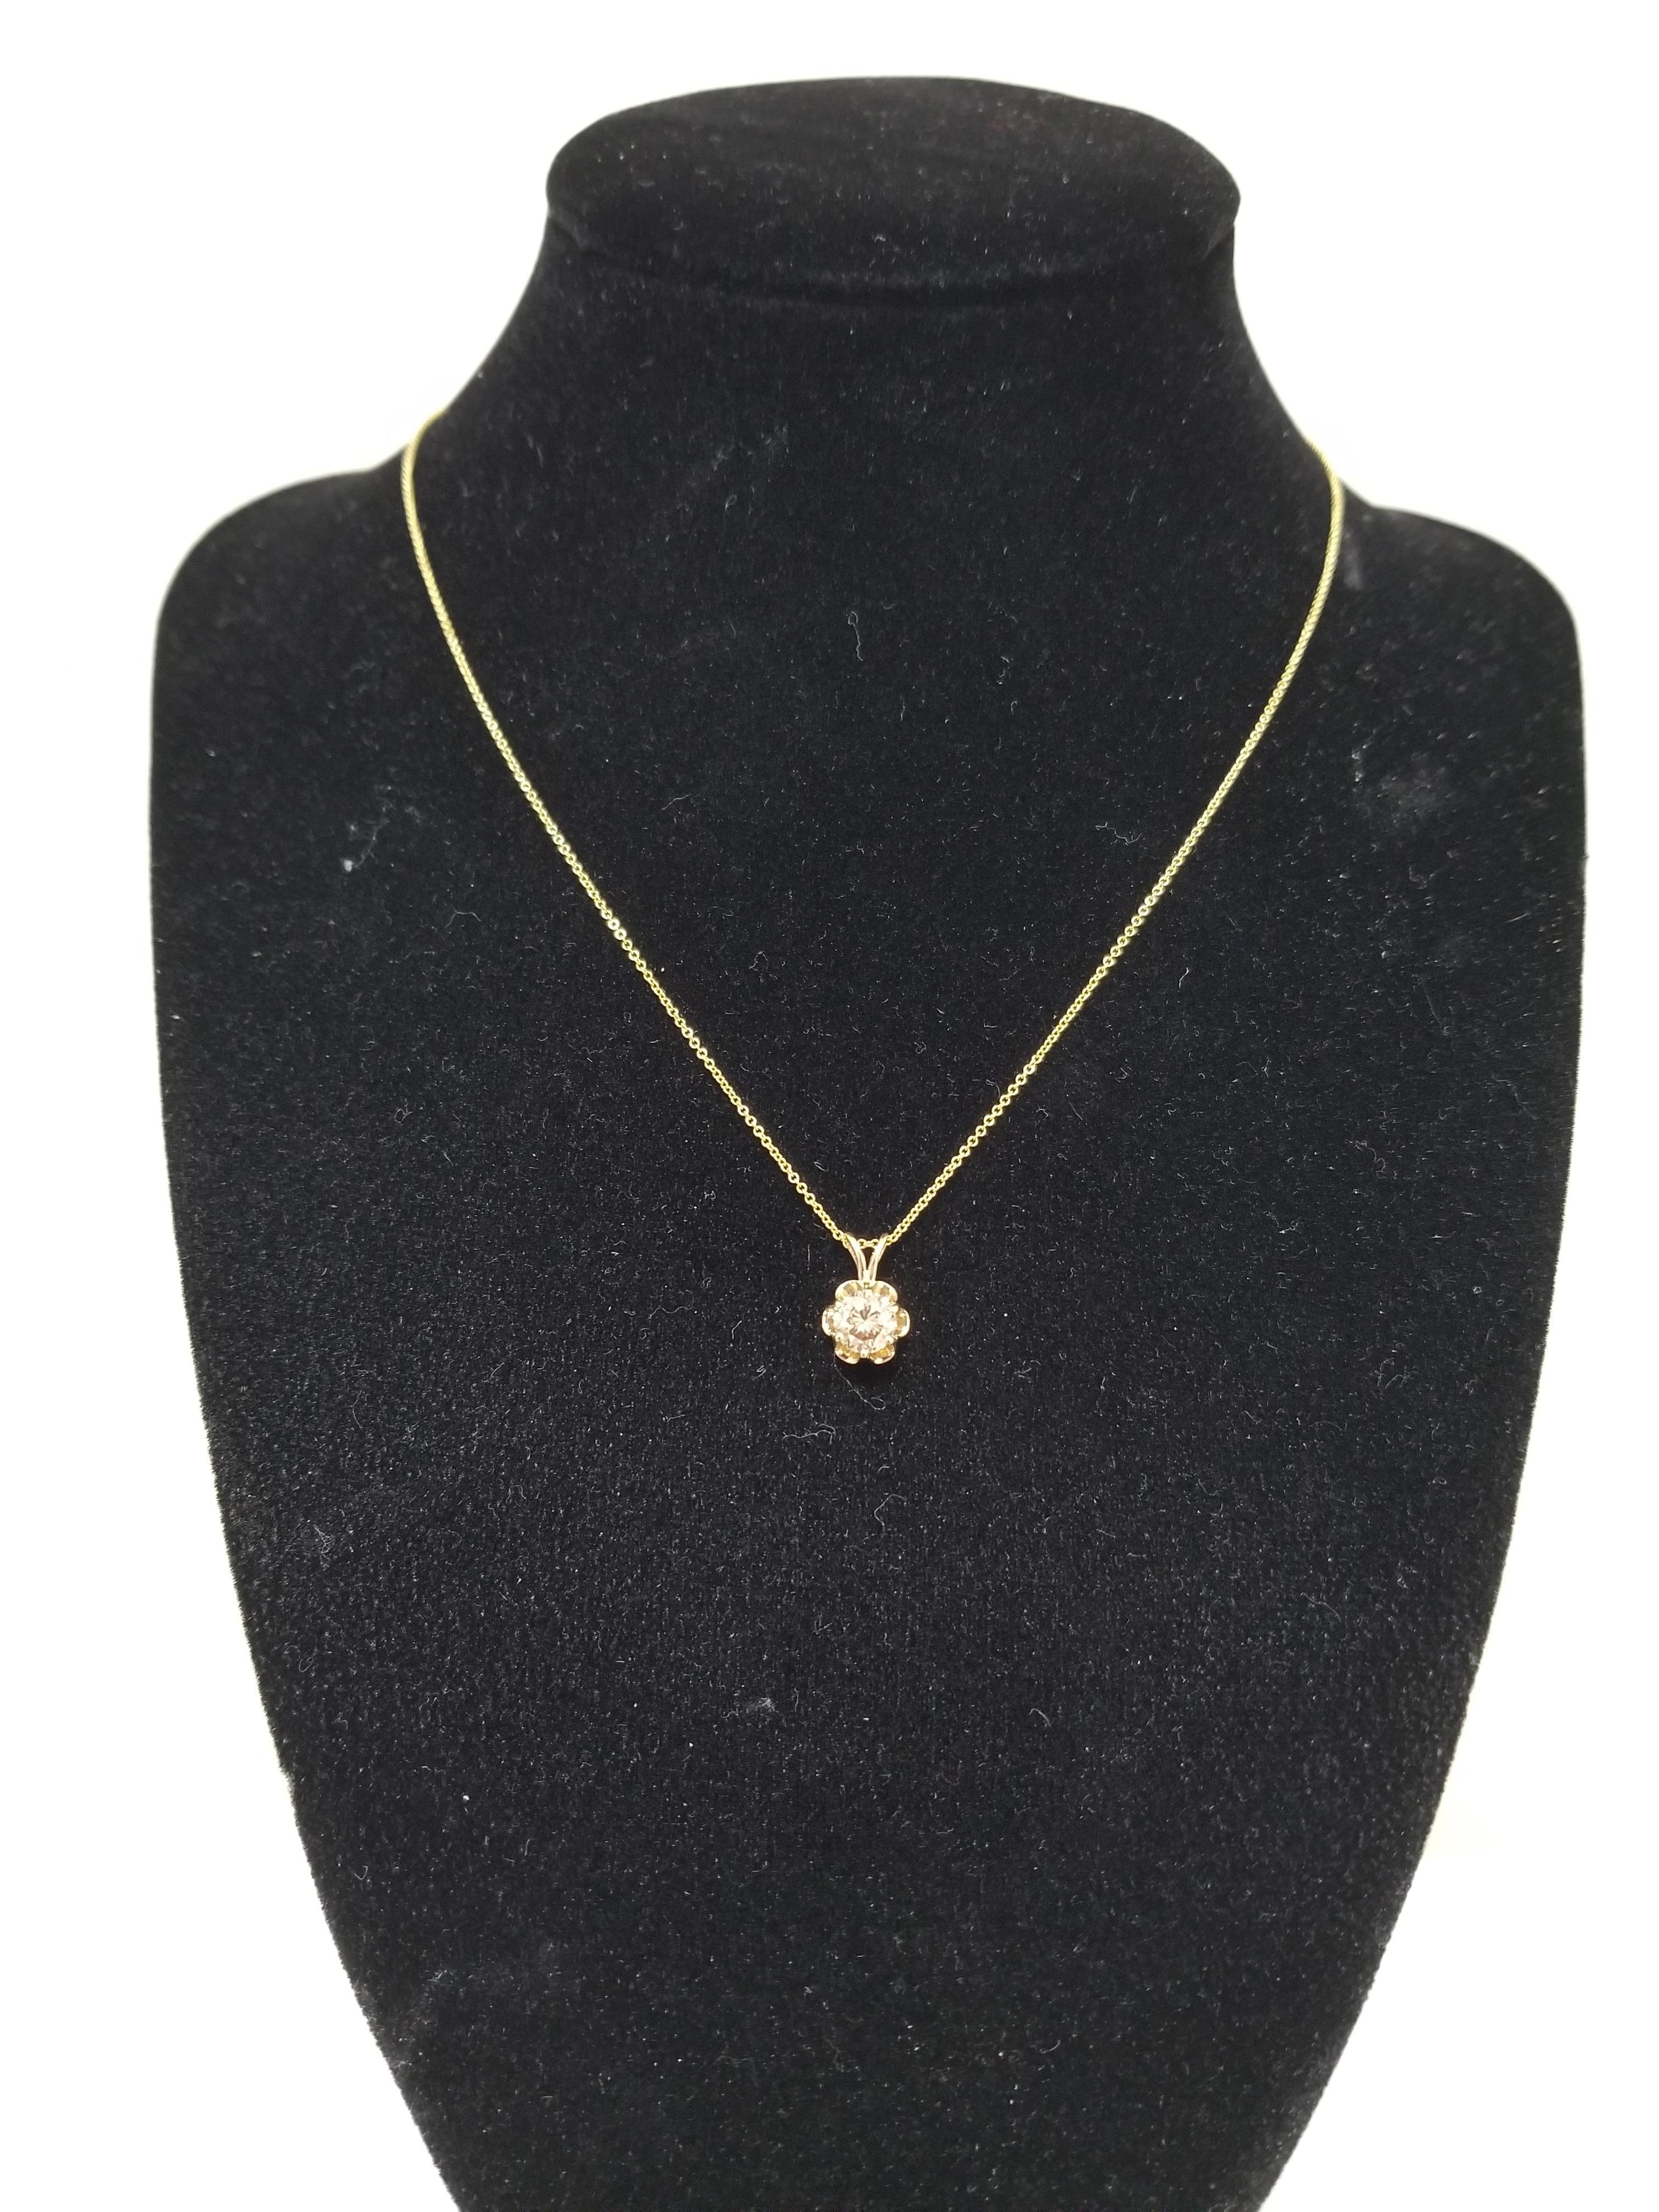 This gorgeous diamond pendant features a 0.82 carat GIA round diamond solitaire set in a beautiful 14 karat yellow gold buttercup design. Pendant measures approximately 0.5 inch length and 0.25 inch wide. 

(Pendant Only - Chain sold separately)